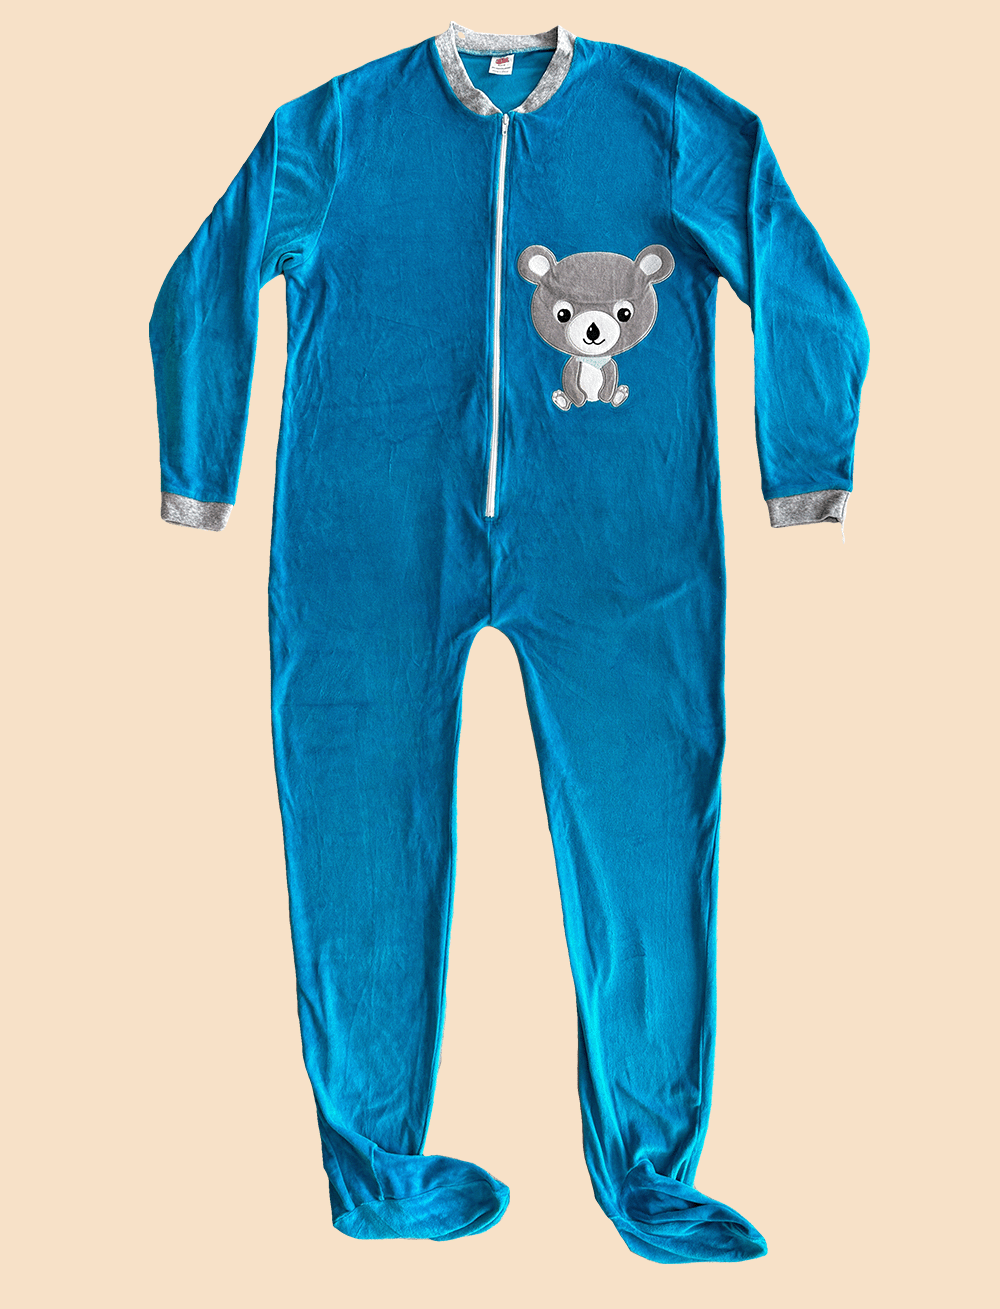 https://www.diaper-minister.com/2060-large_default/baby-bear-footed-pajama.jpg